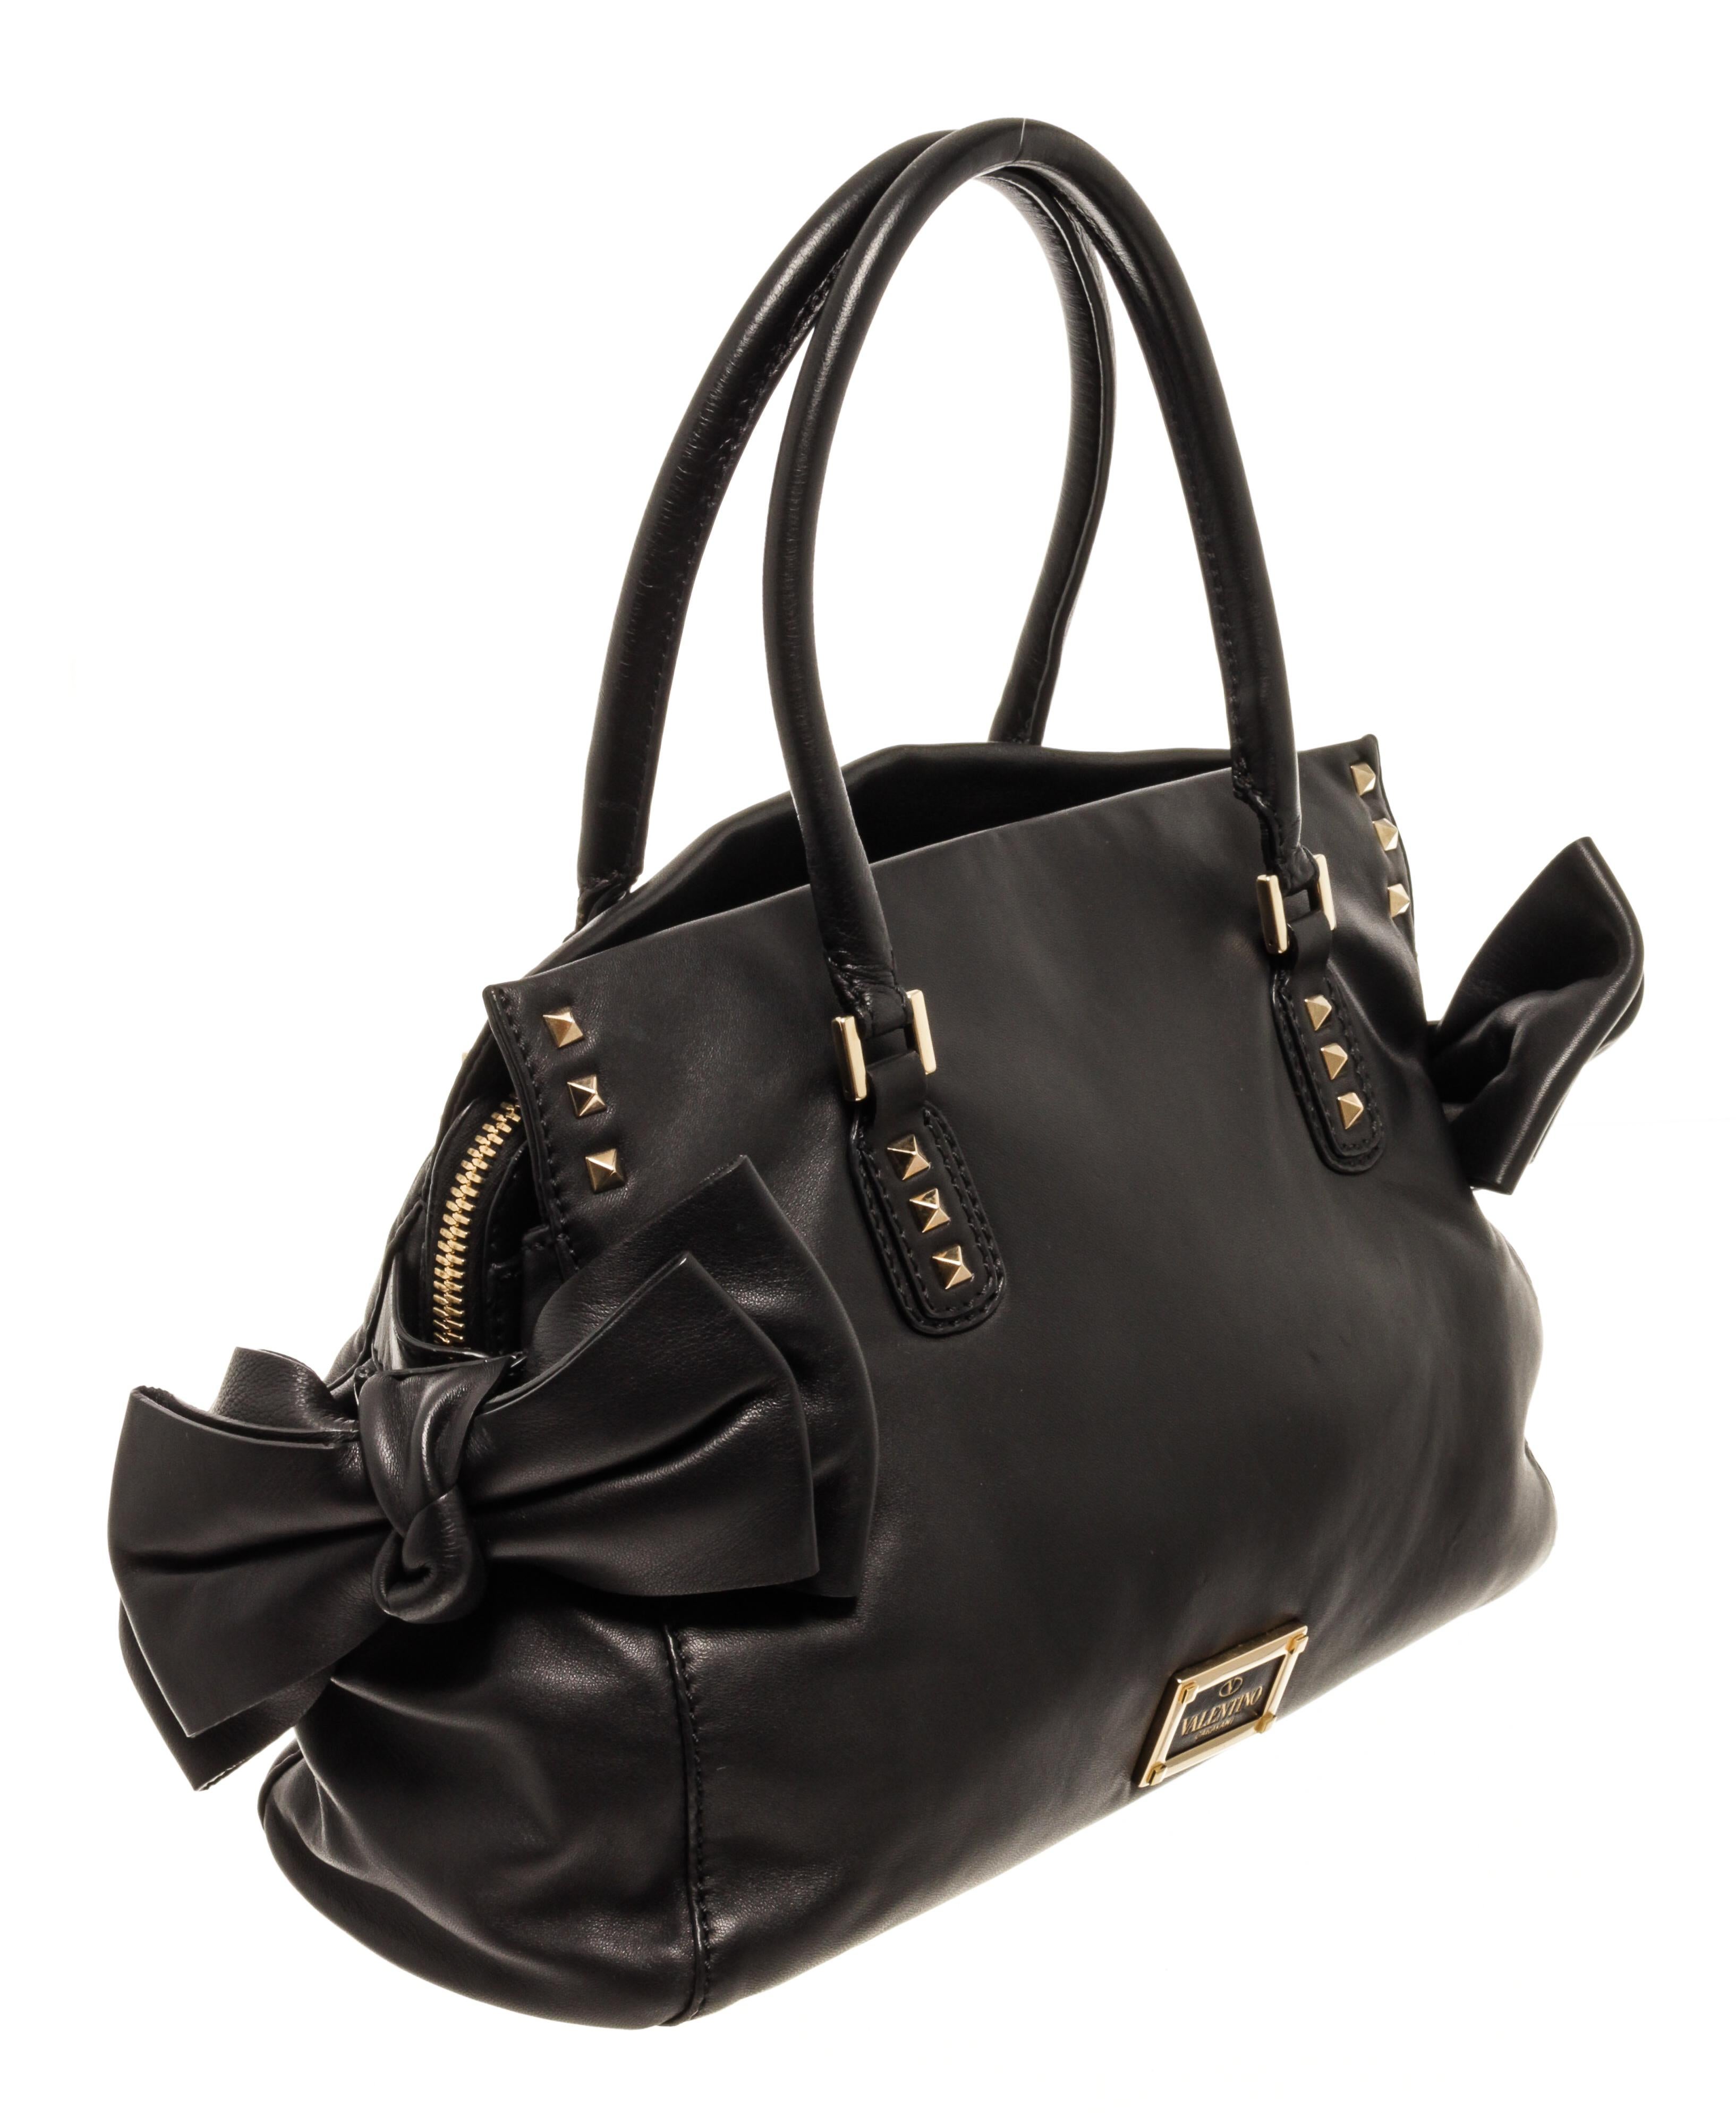 Valentino Black Leather Bow Convertible Handbag with gold-tone hardware, gold-tone metal bag foot, exterior rockstuds accents , exterior gold-tone Valentino embossed logo, two bows at both sides black interior lining, three compartments with one